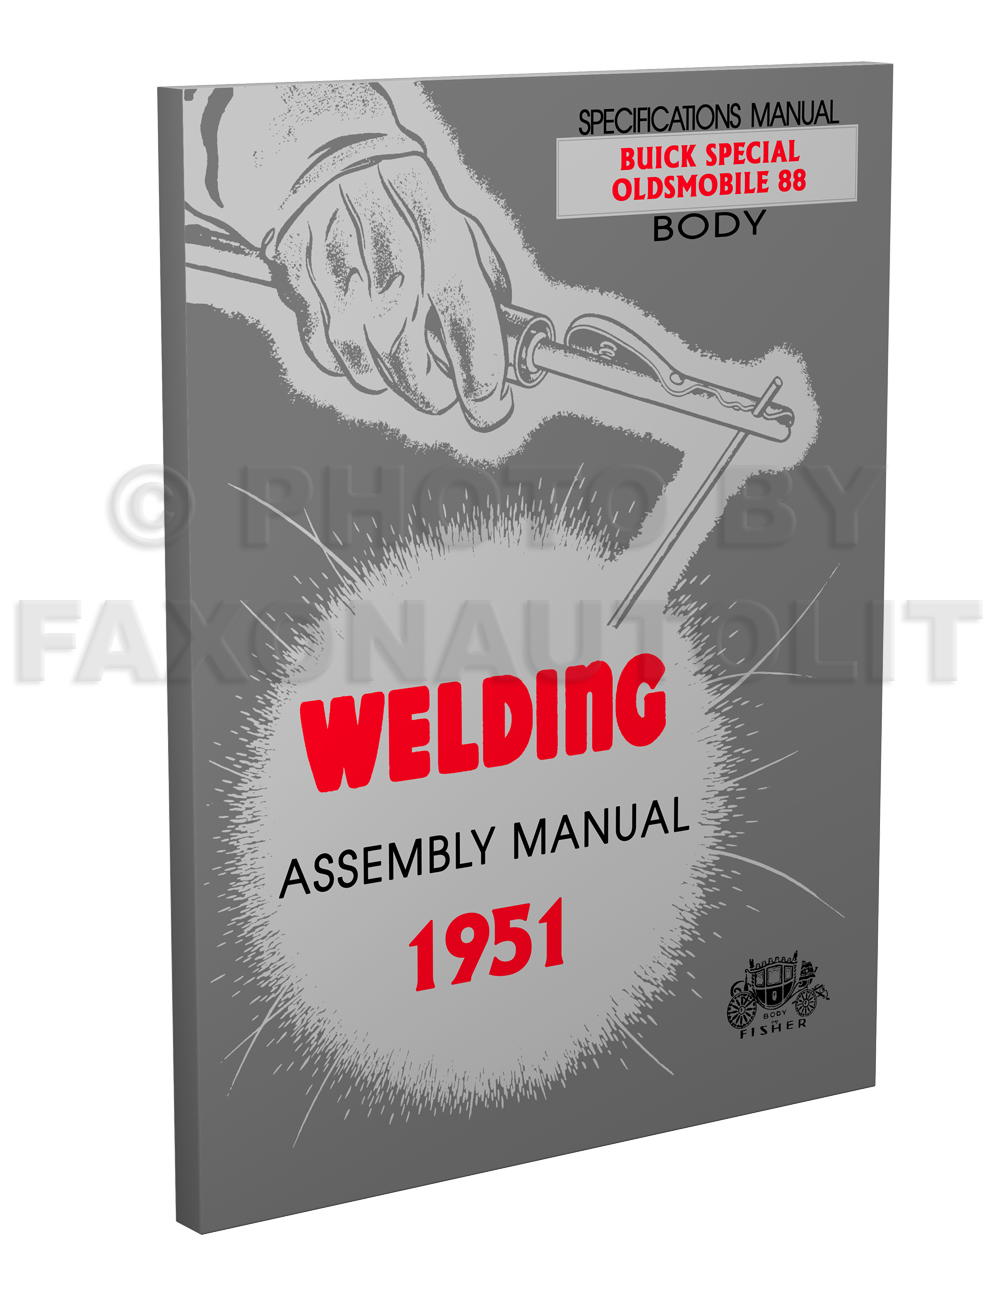 1951 Fisher Body Welding Assembly Manual Reprint - Oldsmobile Super 88 Buick Special